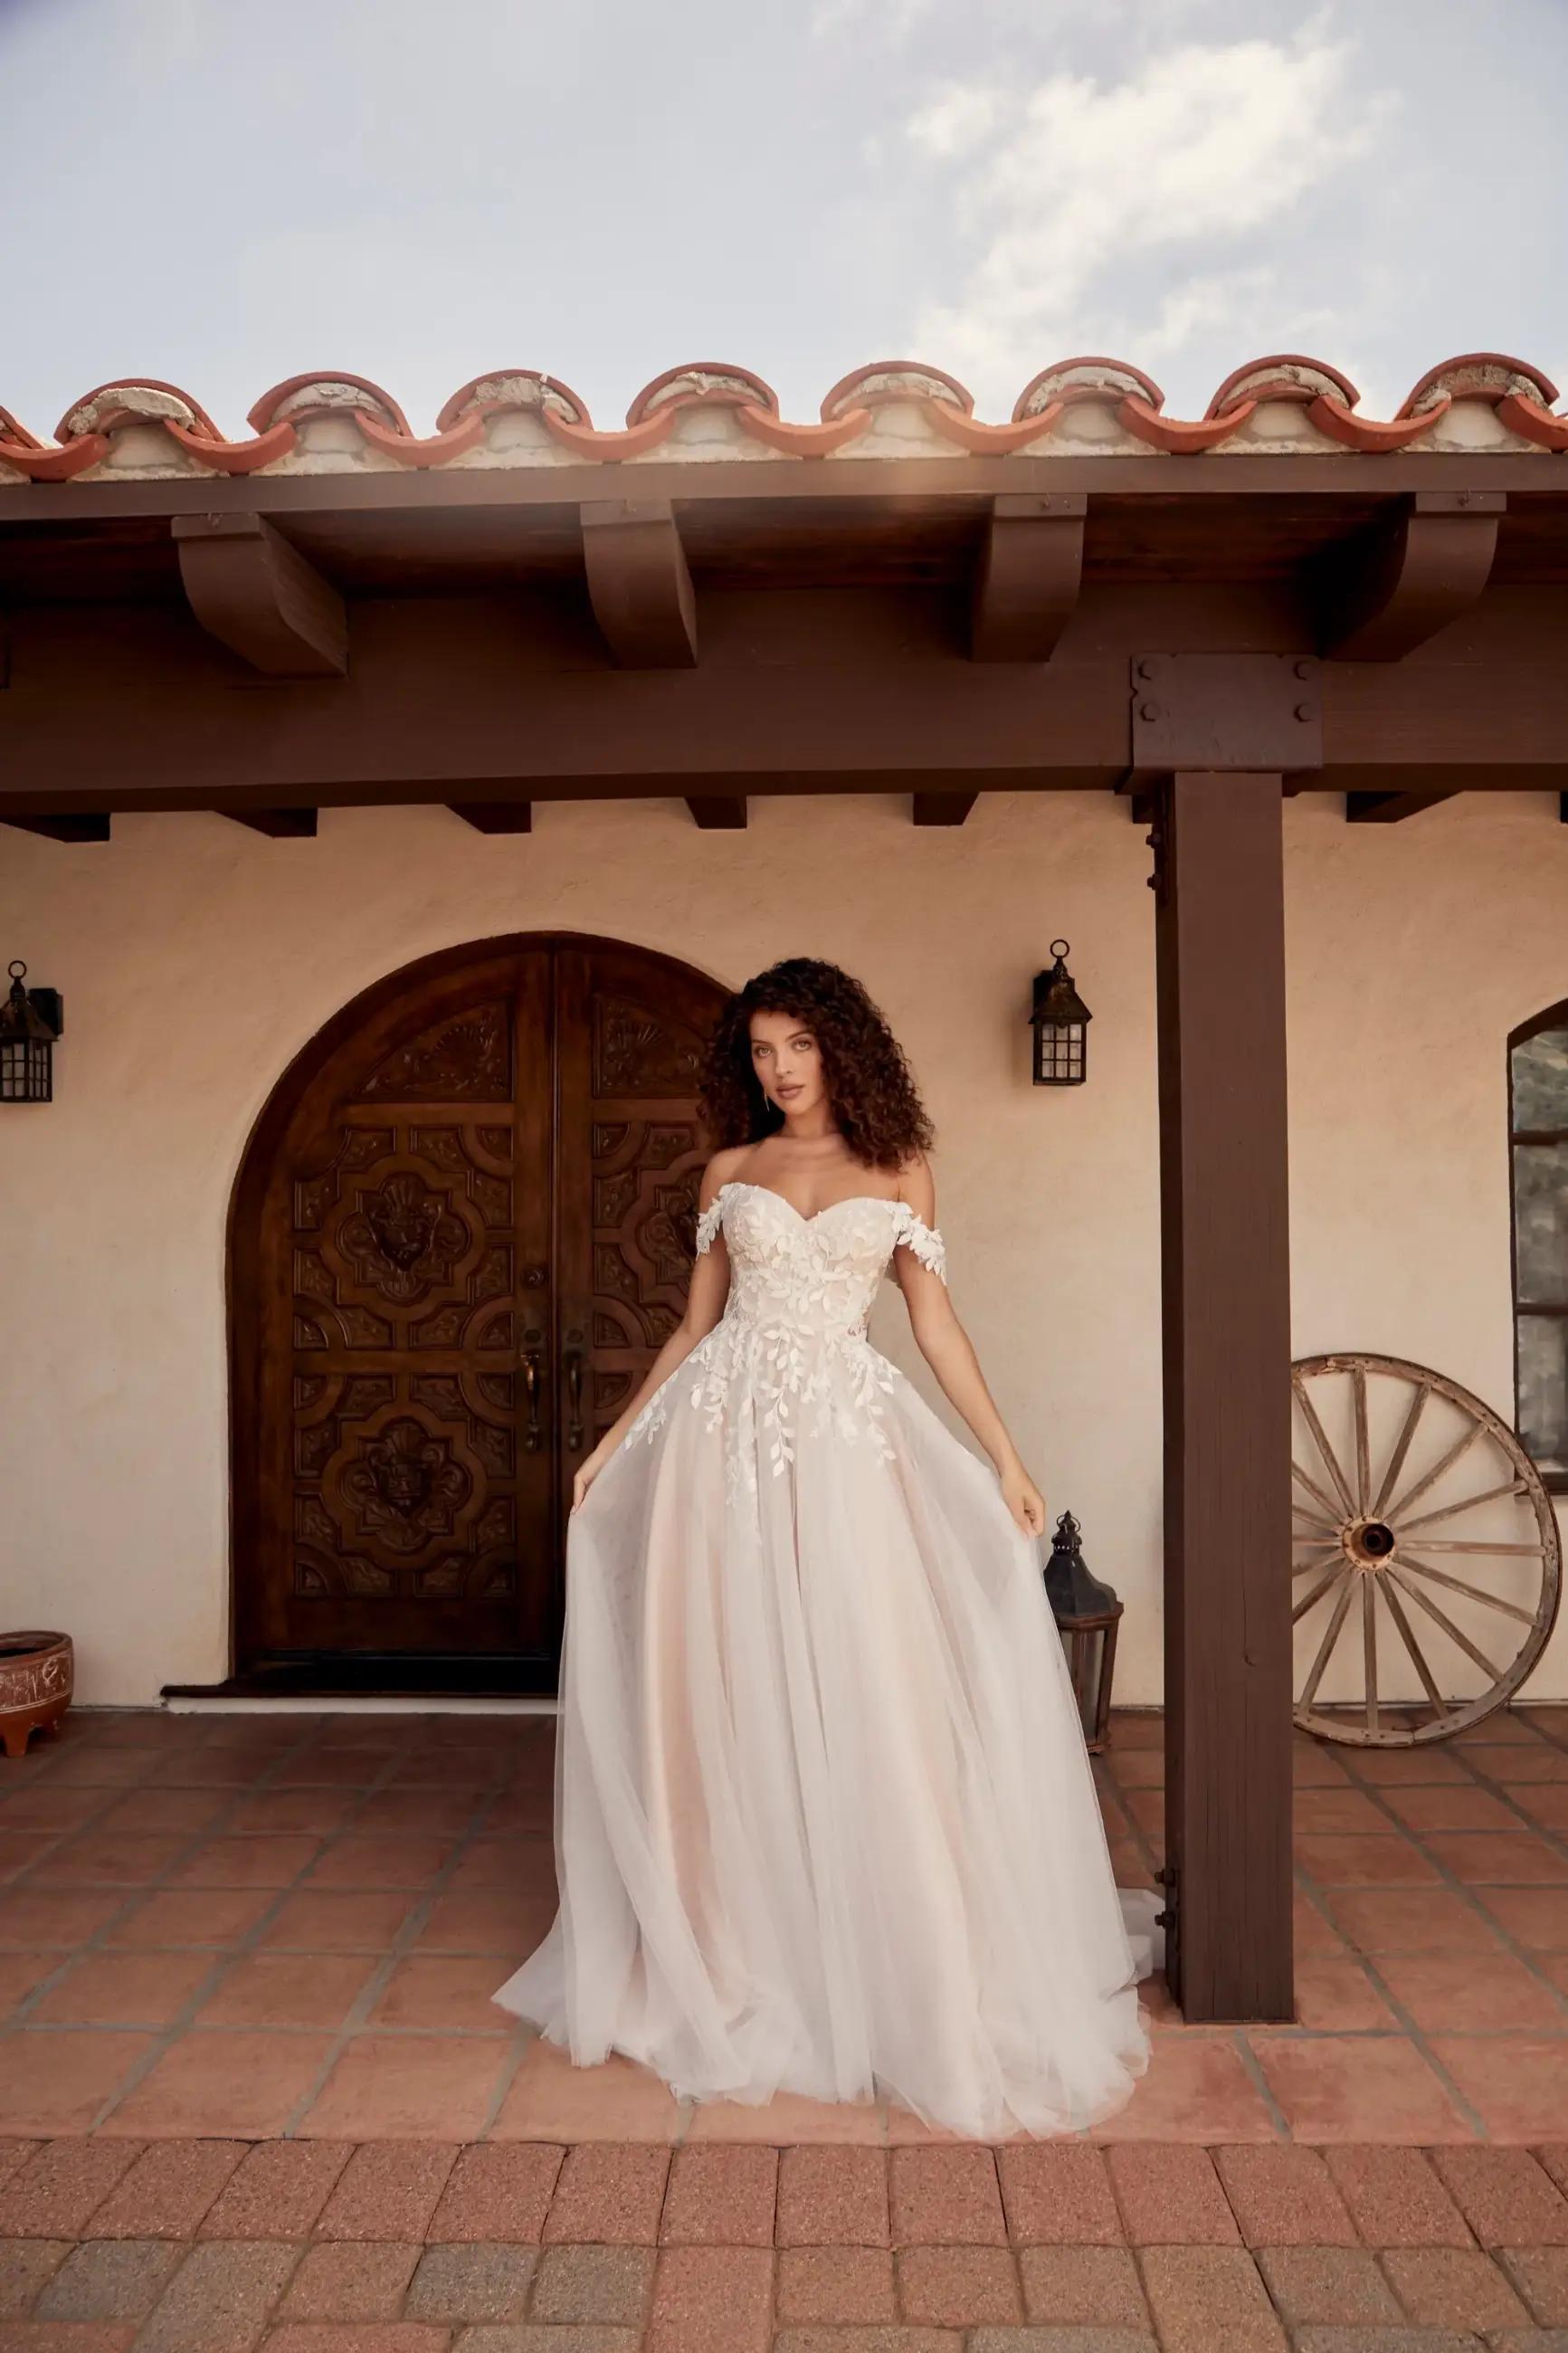 Effortless Elegance: How to Achieve a Whimsical Bridal Look on Your Wedding Day Image